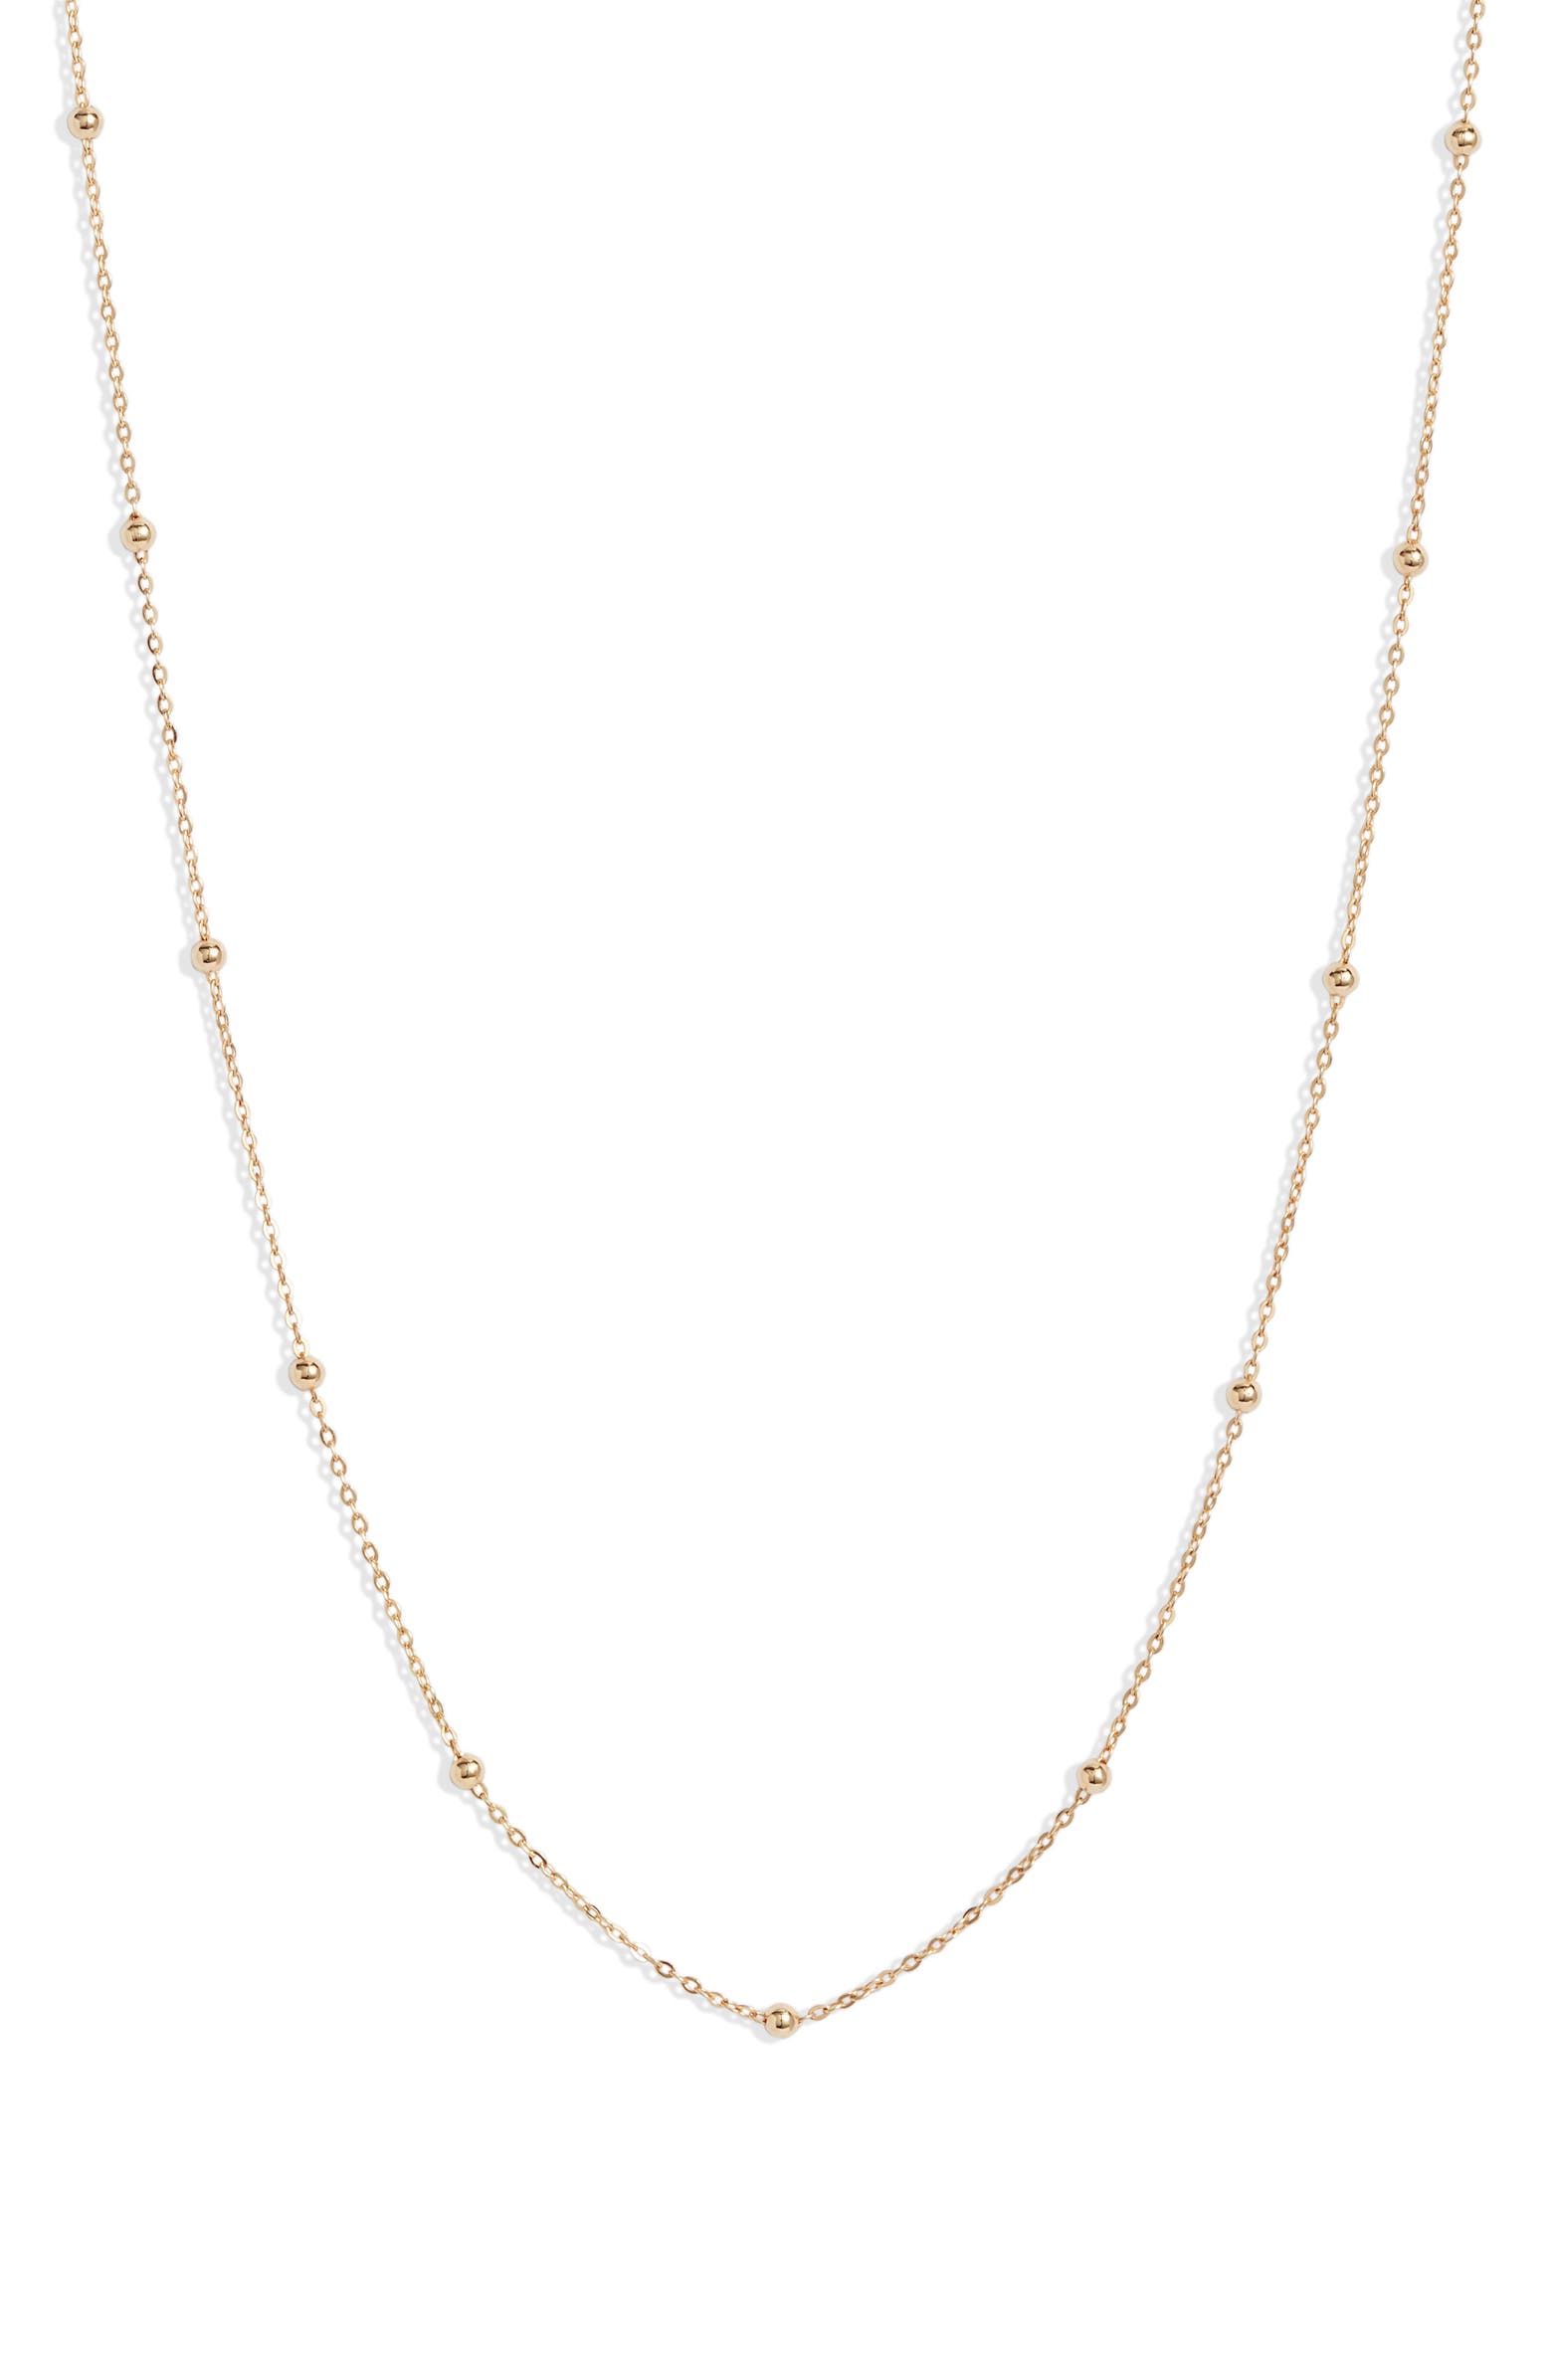 Bony Levy 14K Gold Ball Bead Chain Necklace | Nordstrom